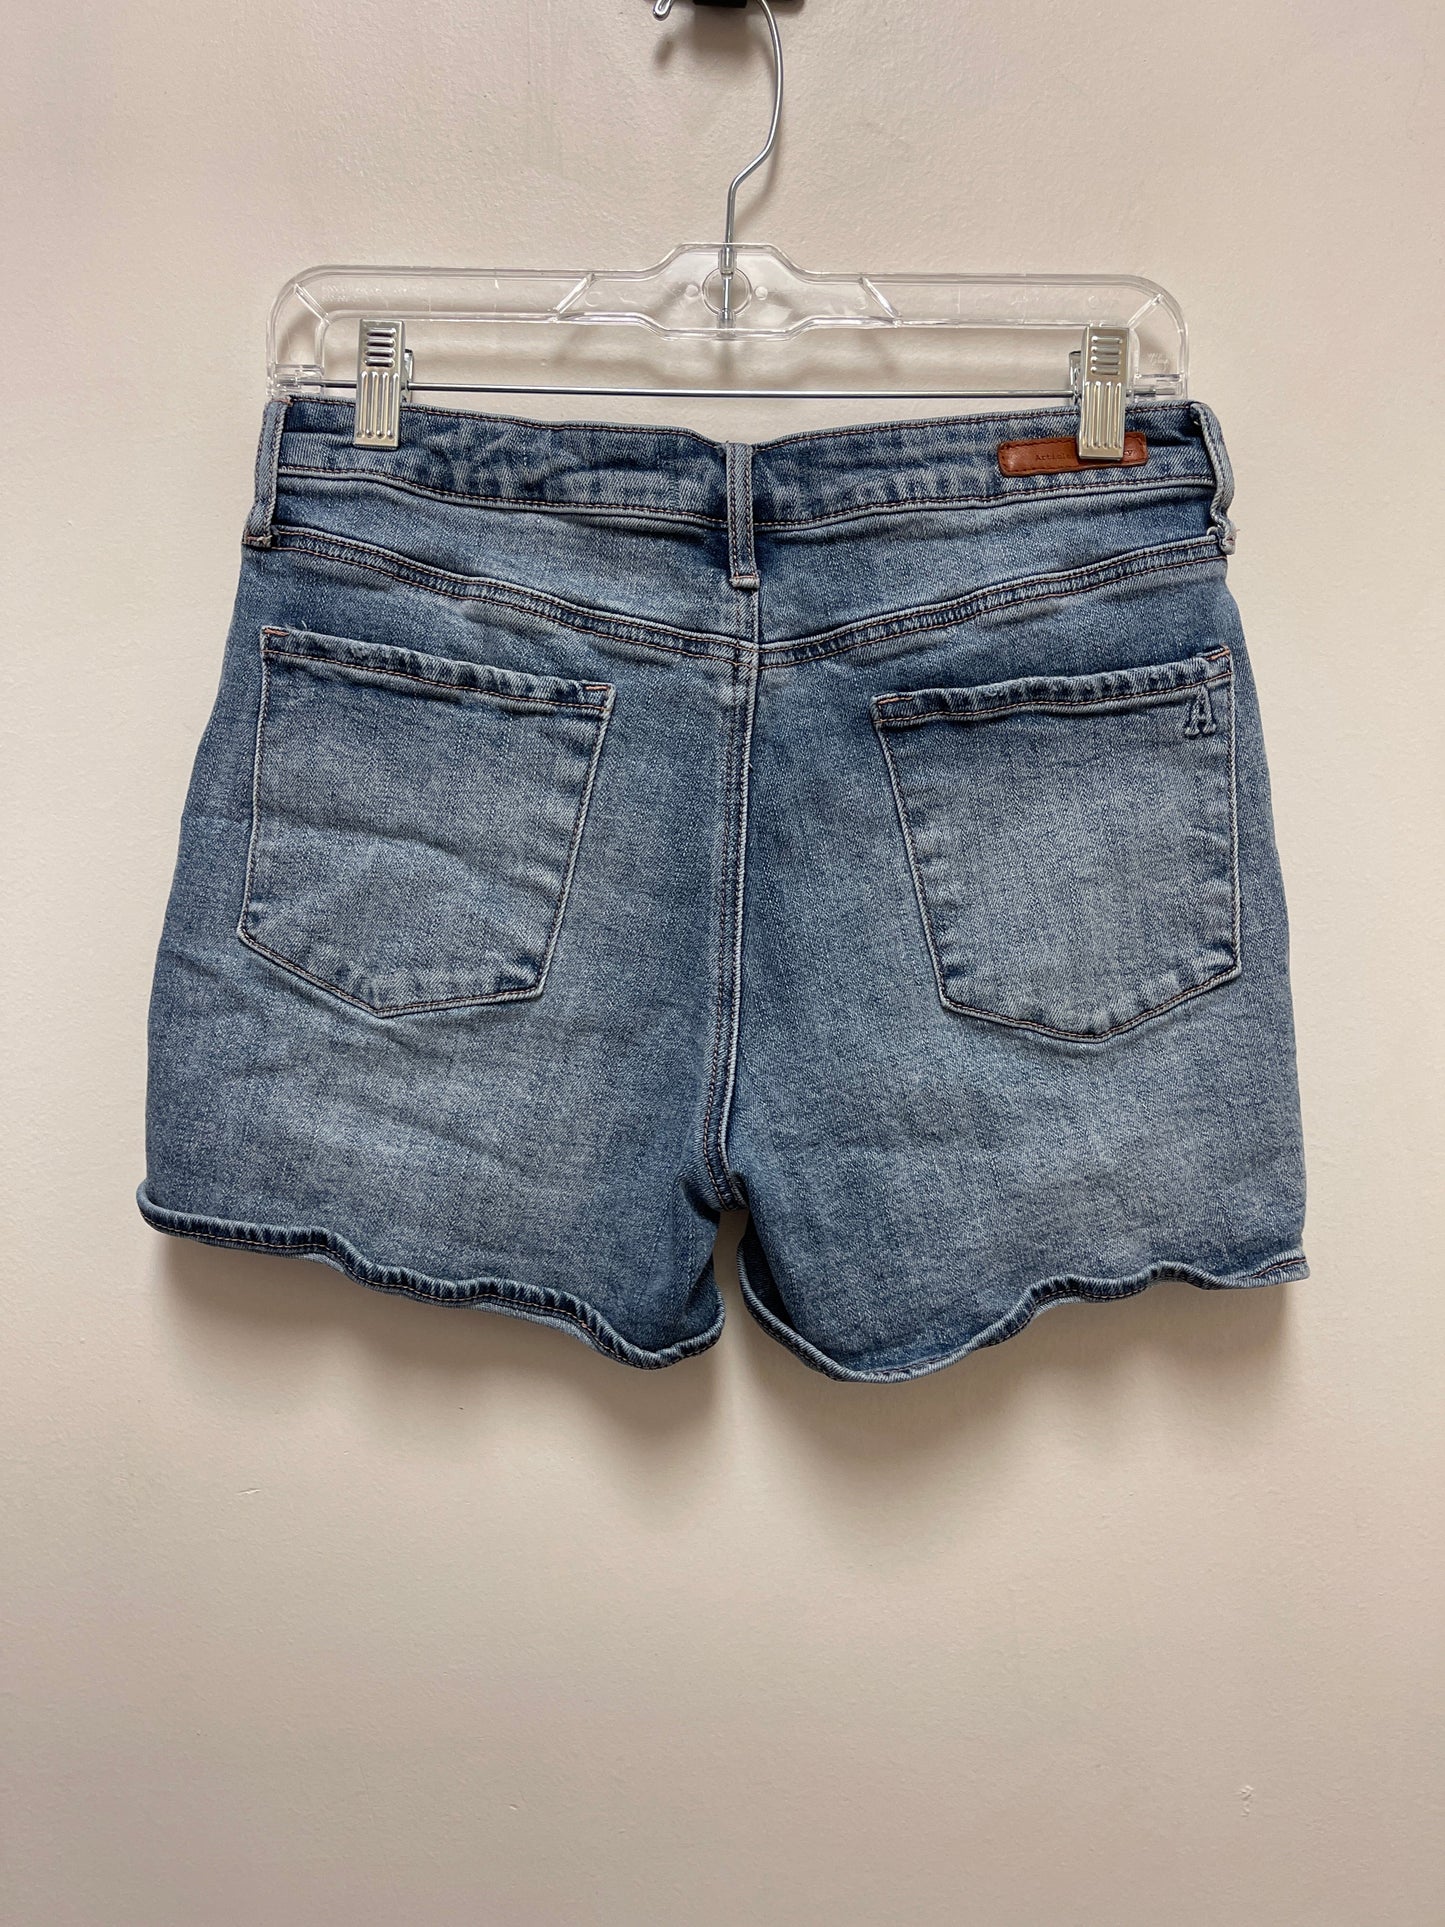 Blue Denim Shorts Articles Of Society, Size 6